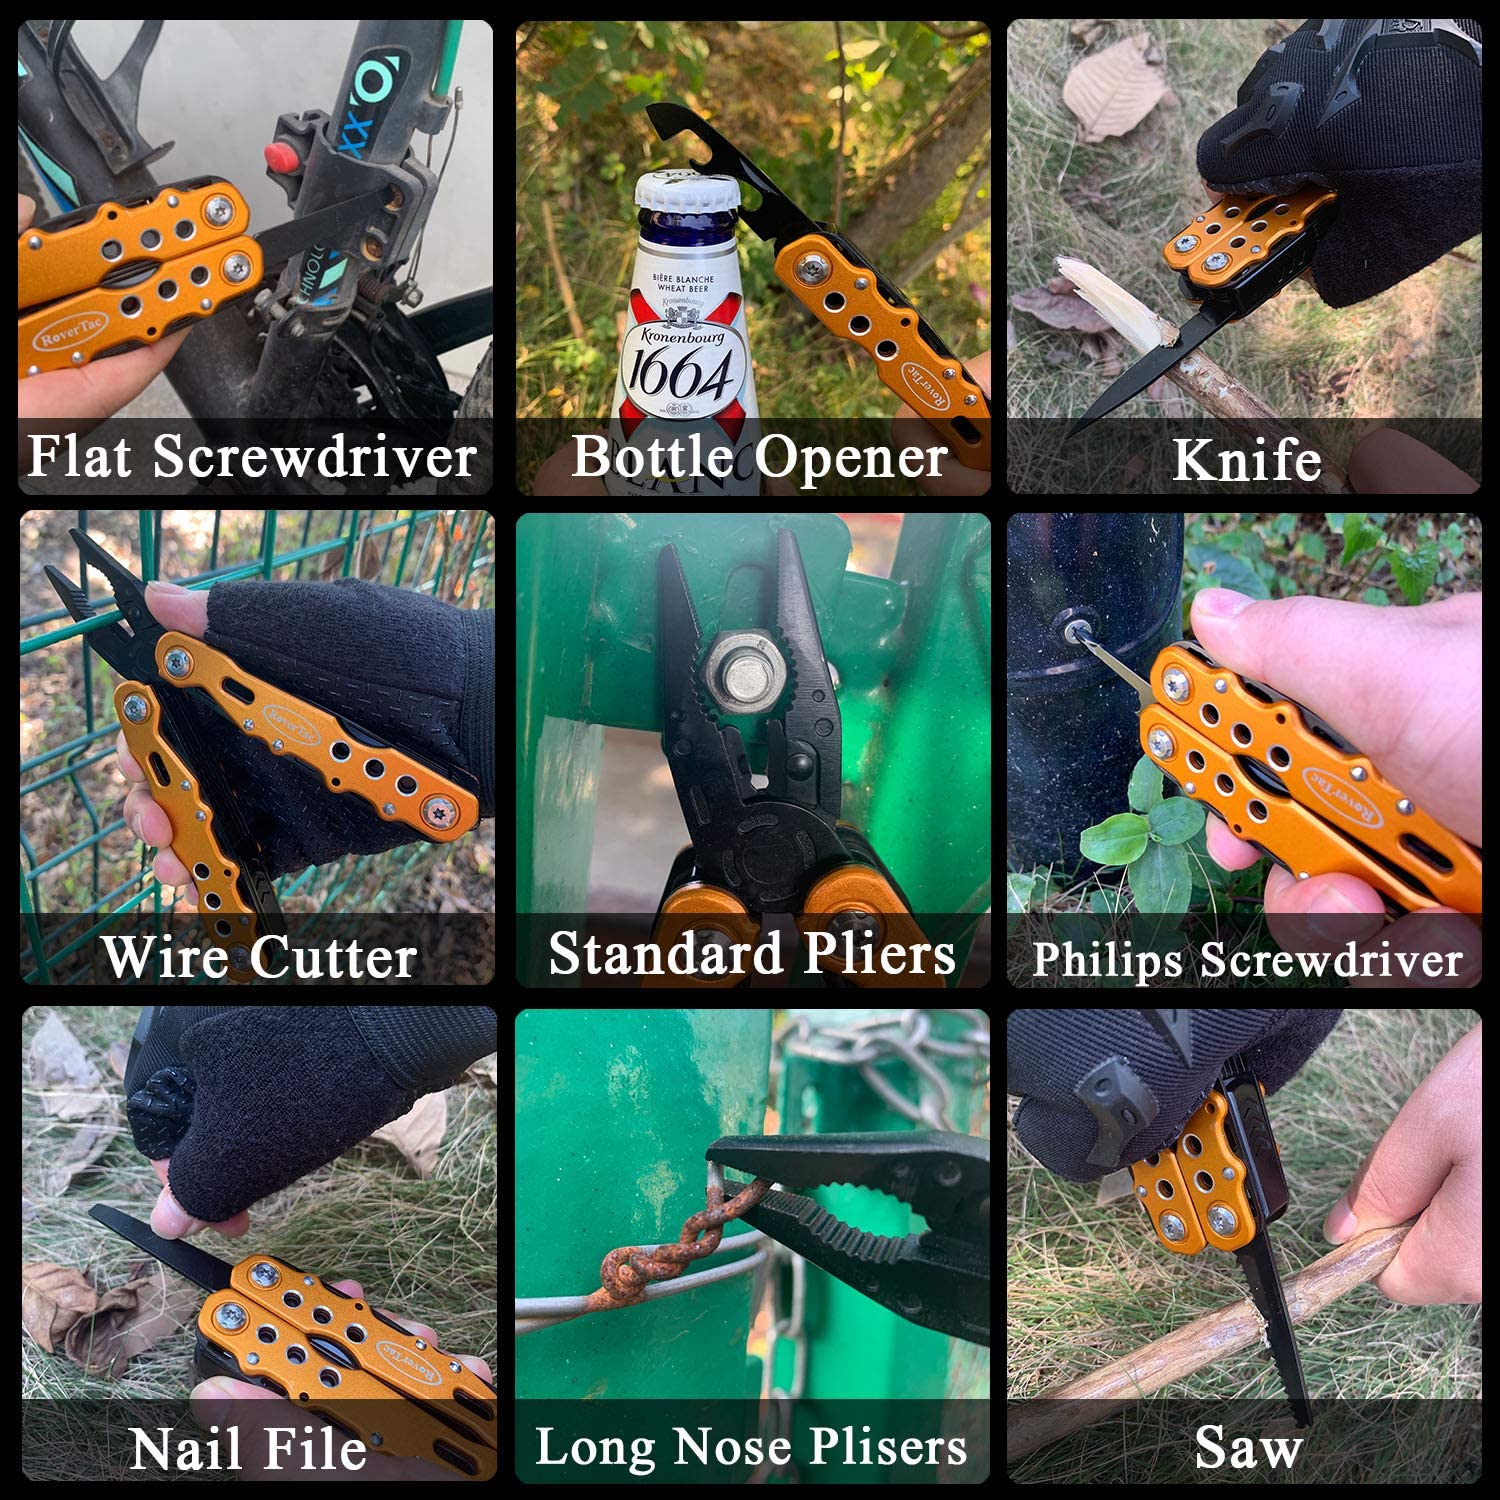 Gifts for Dad Husband Boyfriend Gifts for Him Unique Birthday Gifts for Men RoverTac 14 in 1 Multitool Pocket Knife Pliers Screwdrivers Saw Bottle Opener Perfect for Camping Survival Hiking Repairs